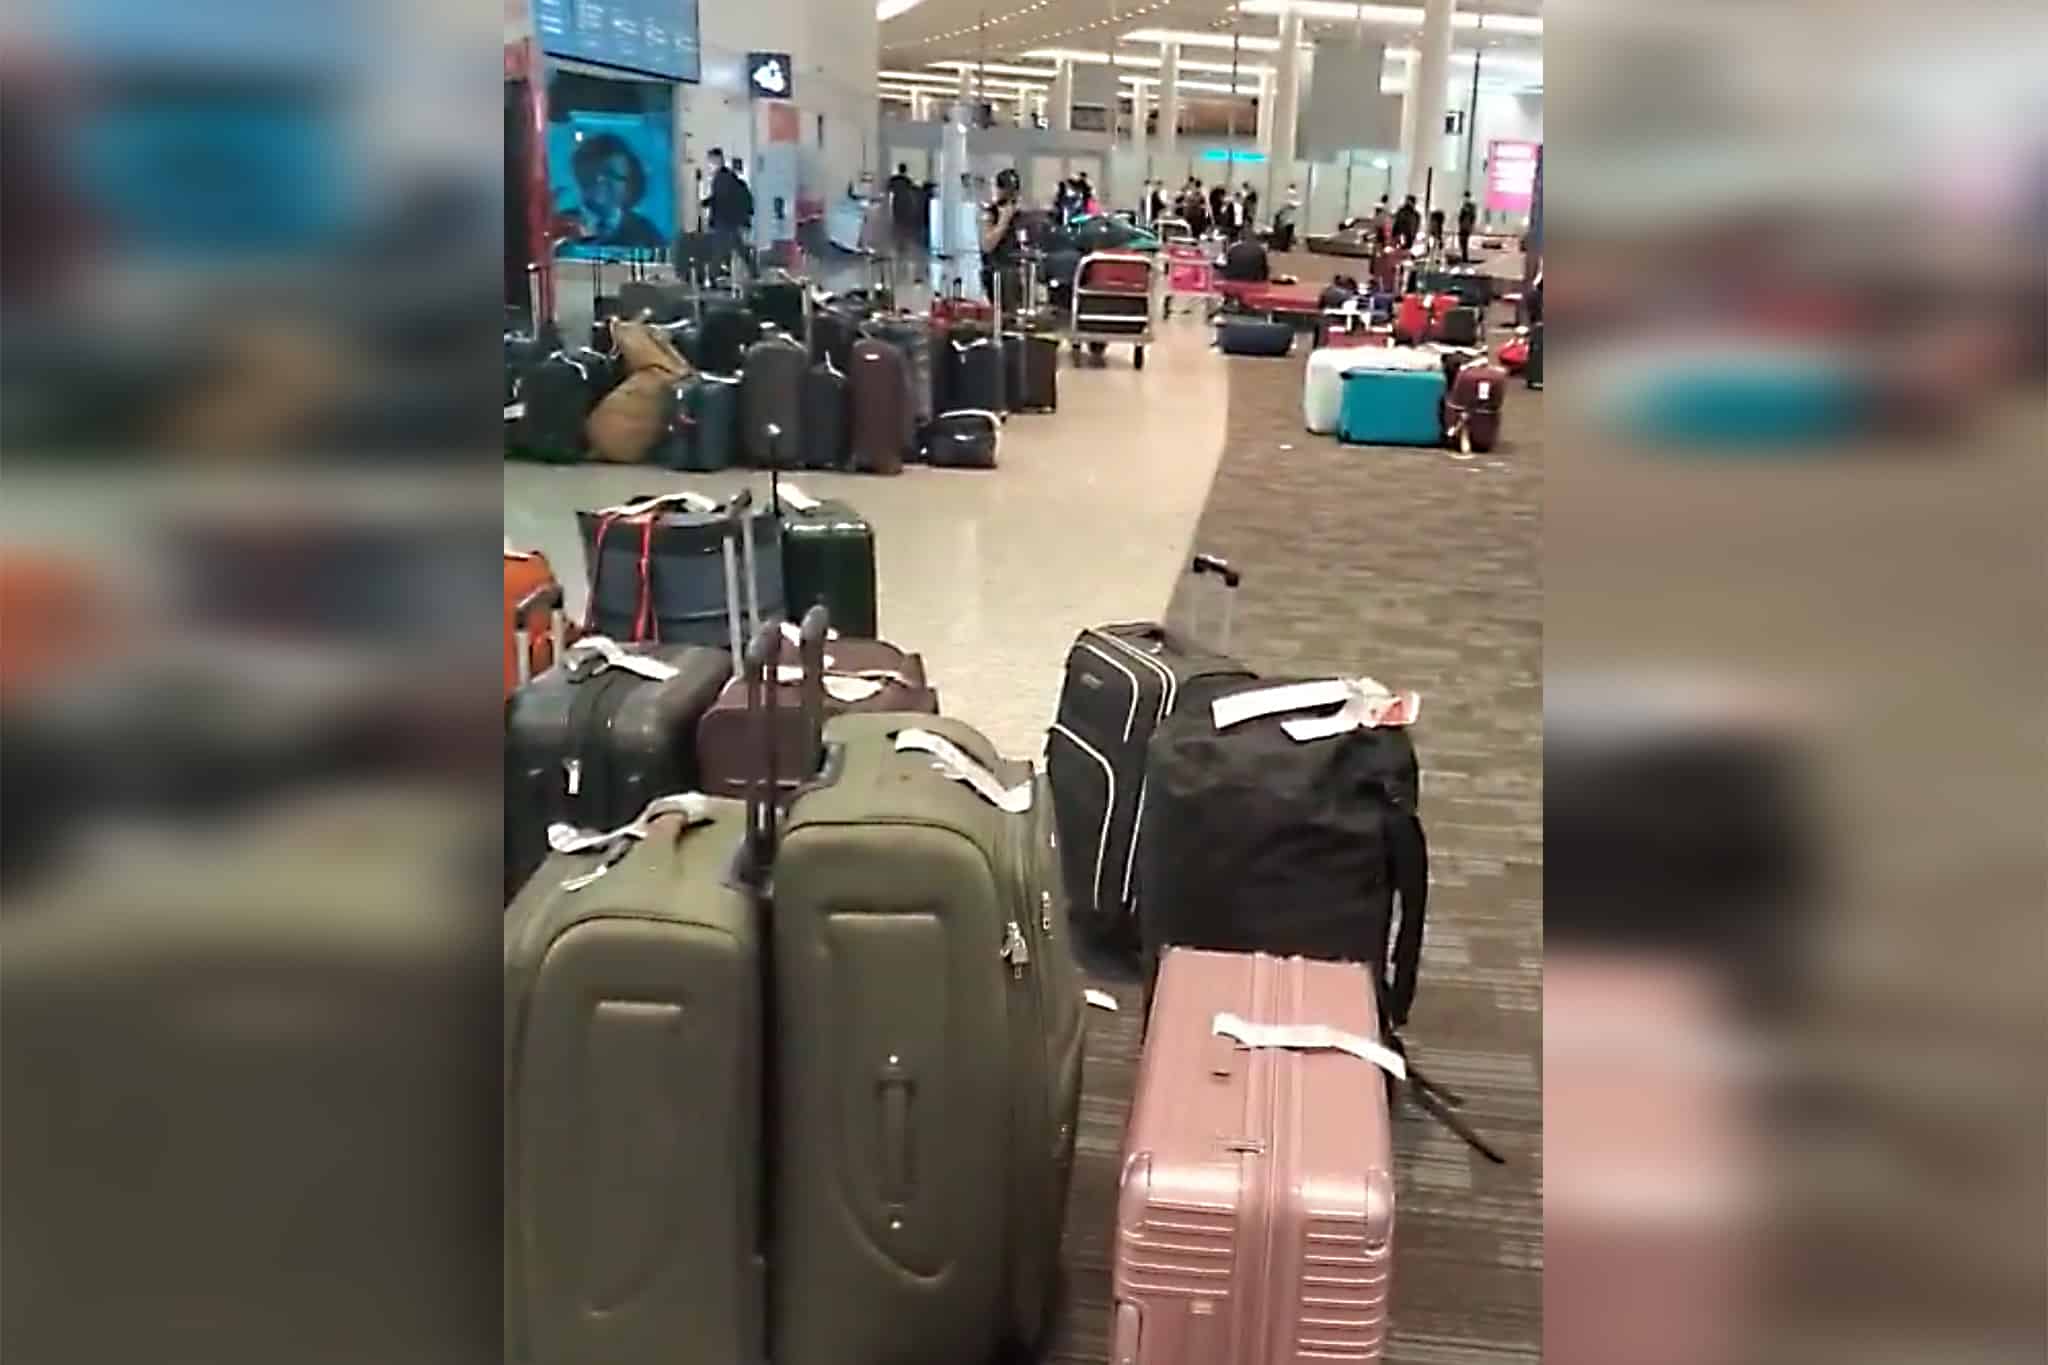 pearson airport luggage